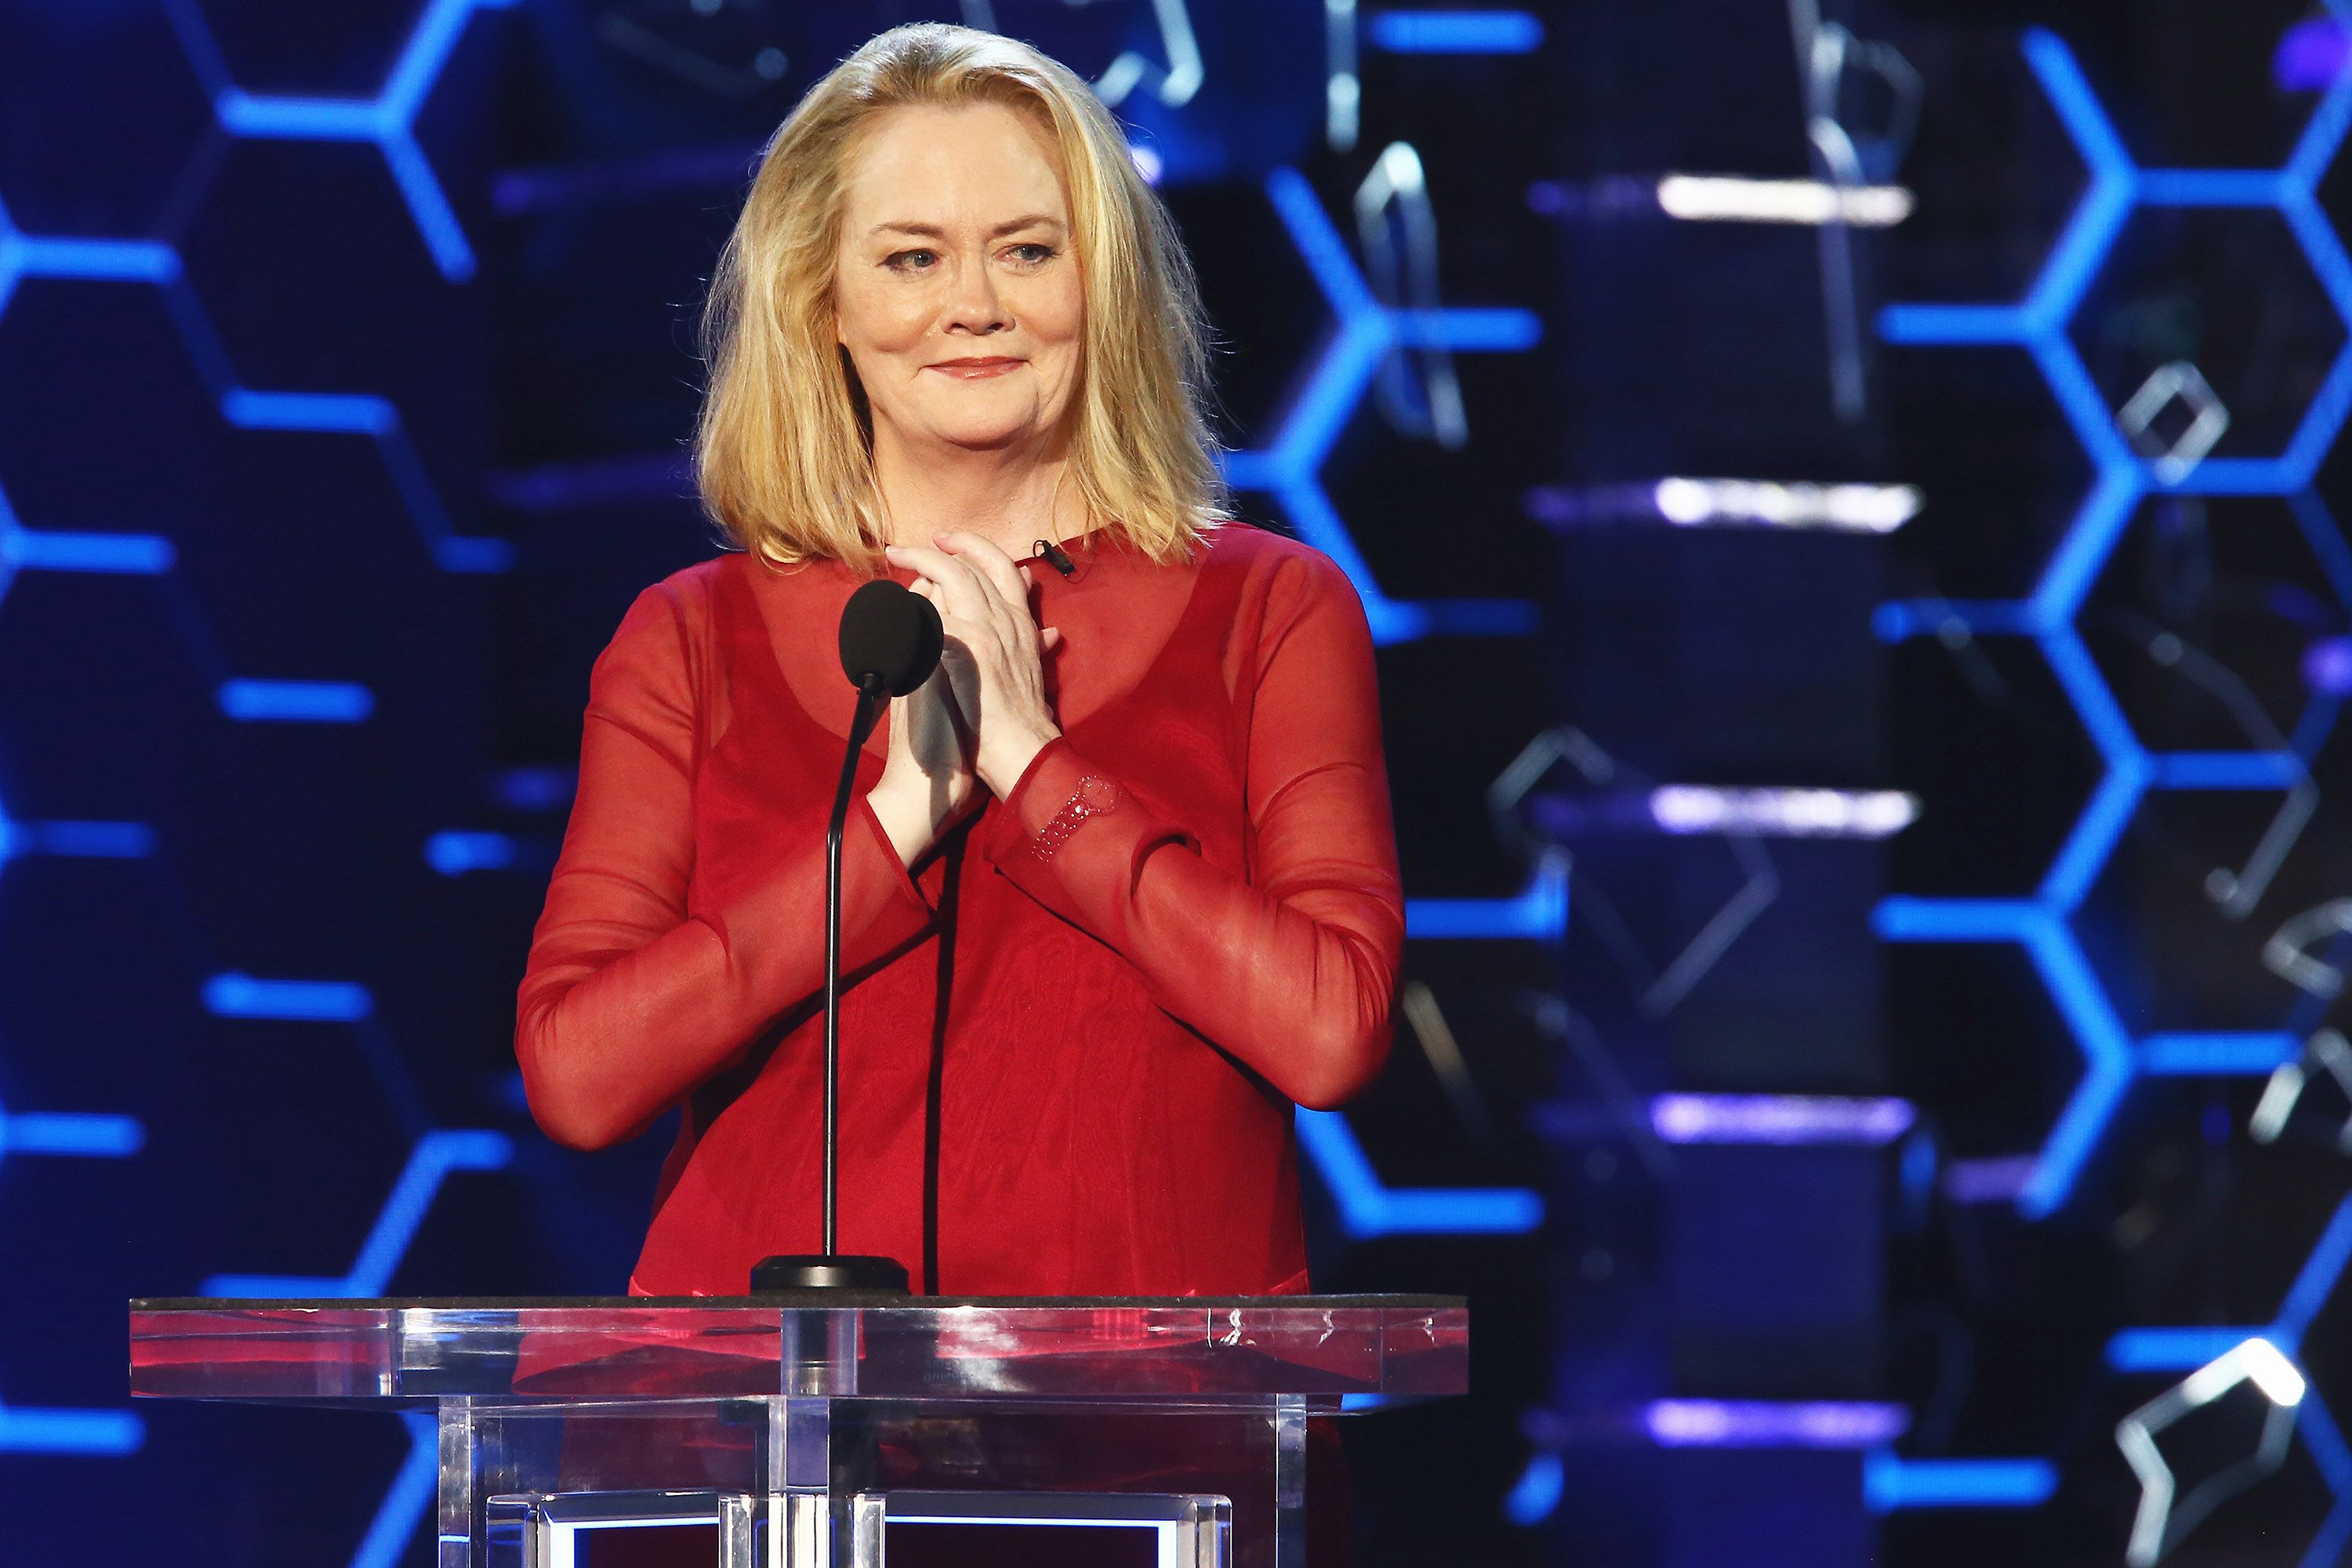 Cybill Shepherd at the Comedy Central Roast Of Bruce Willis on July 14, 2018 | Photo: Getty Images